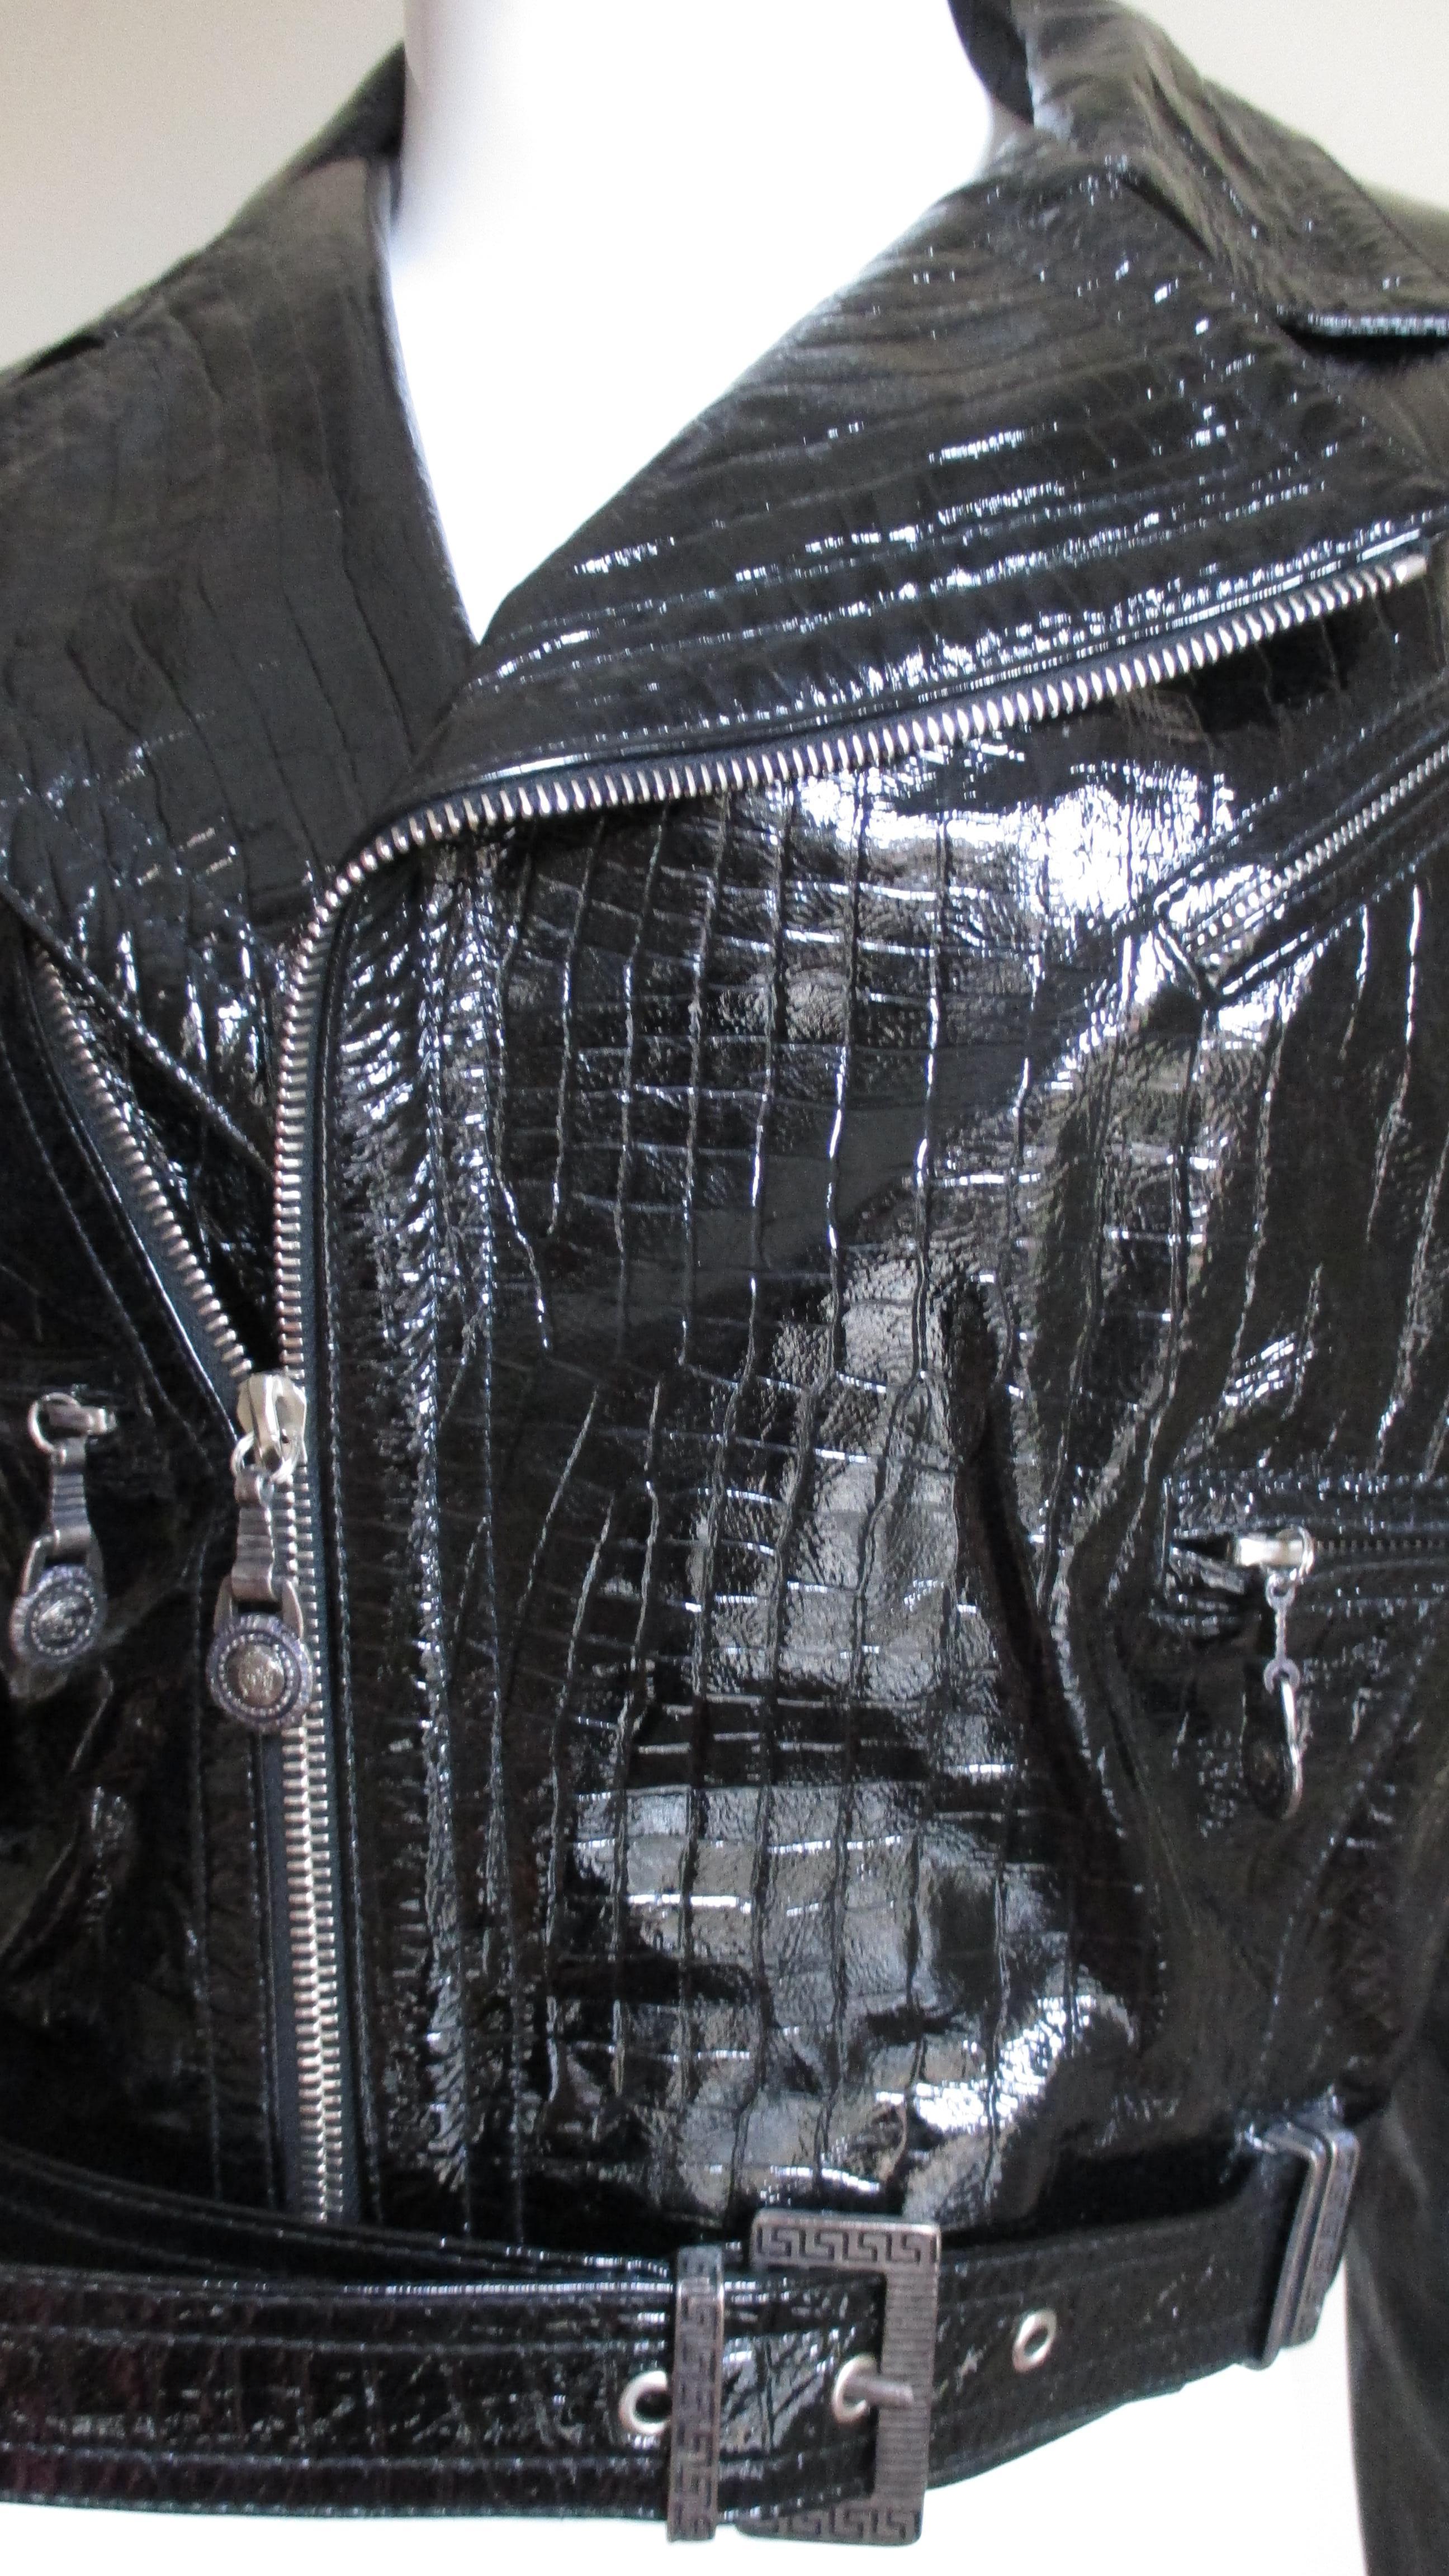 1990s Gianni Versace Patent Leather Motorcycle Jacket and Skirt 1